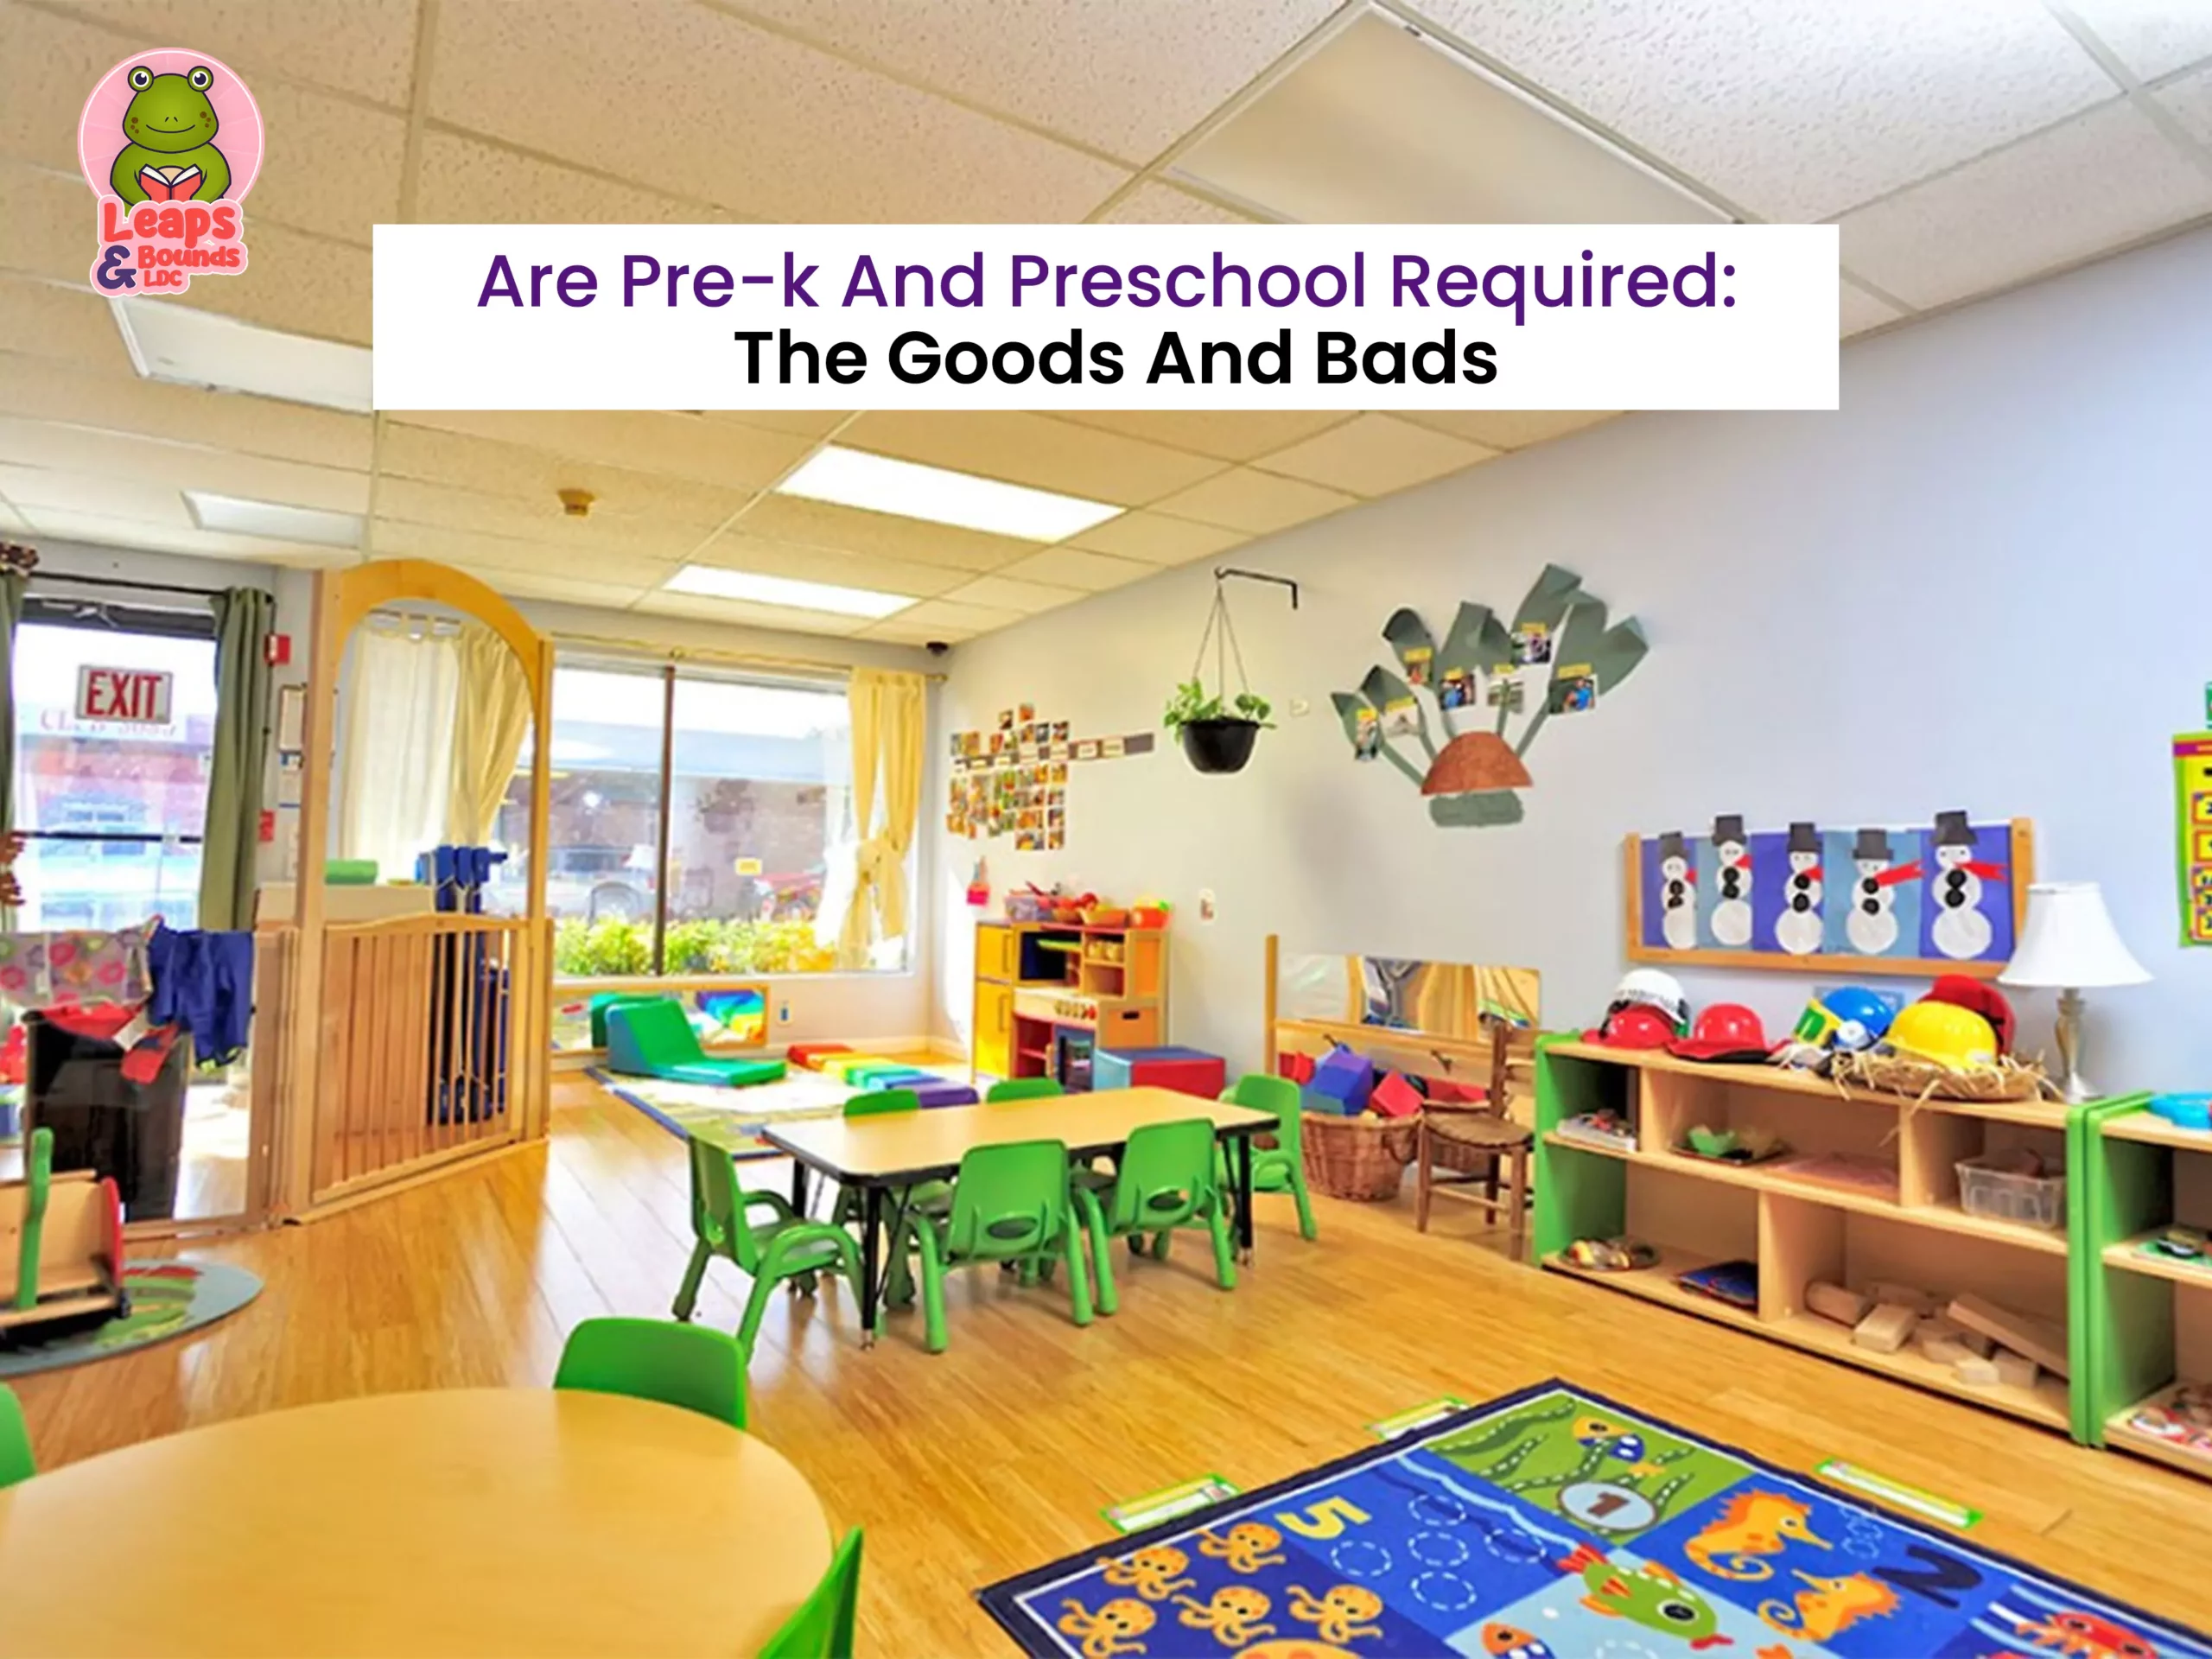 Are Pre-k And Preschool Required: The Goods And Bads